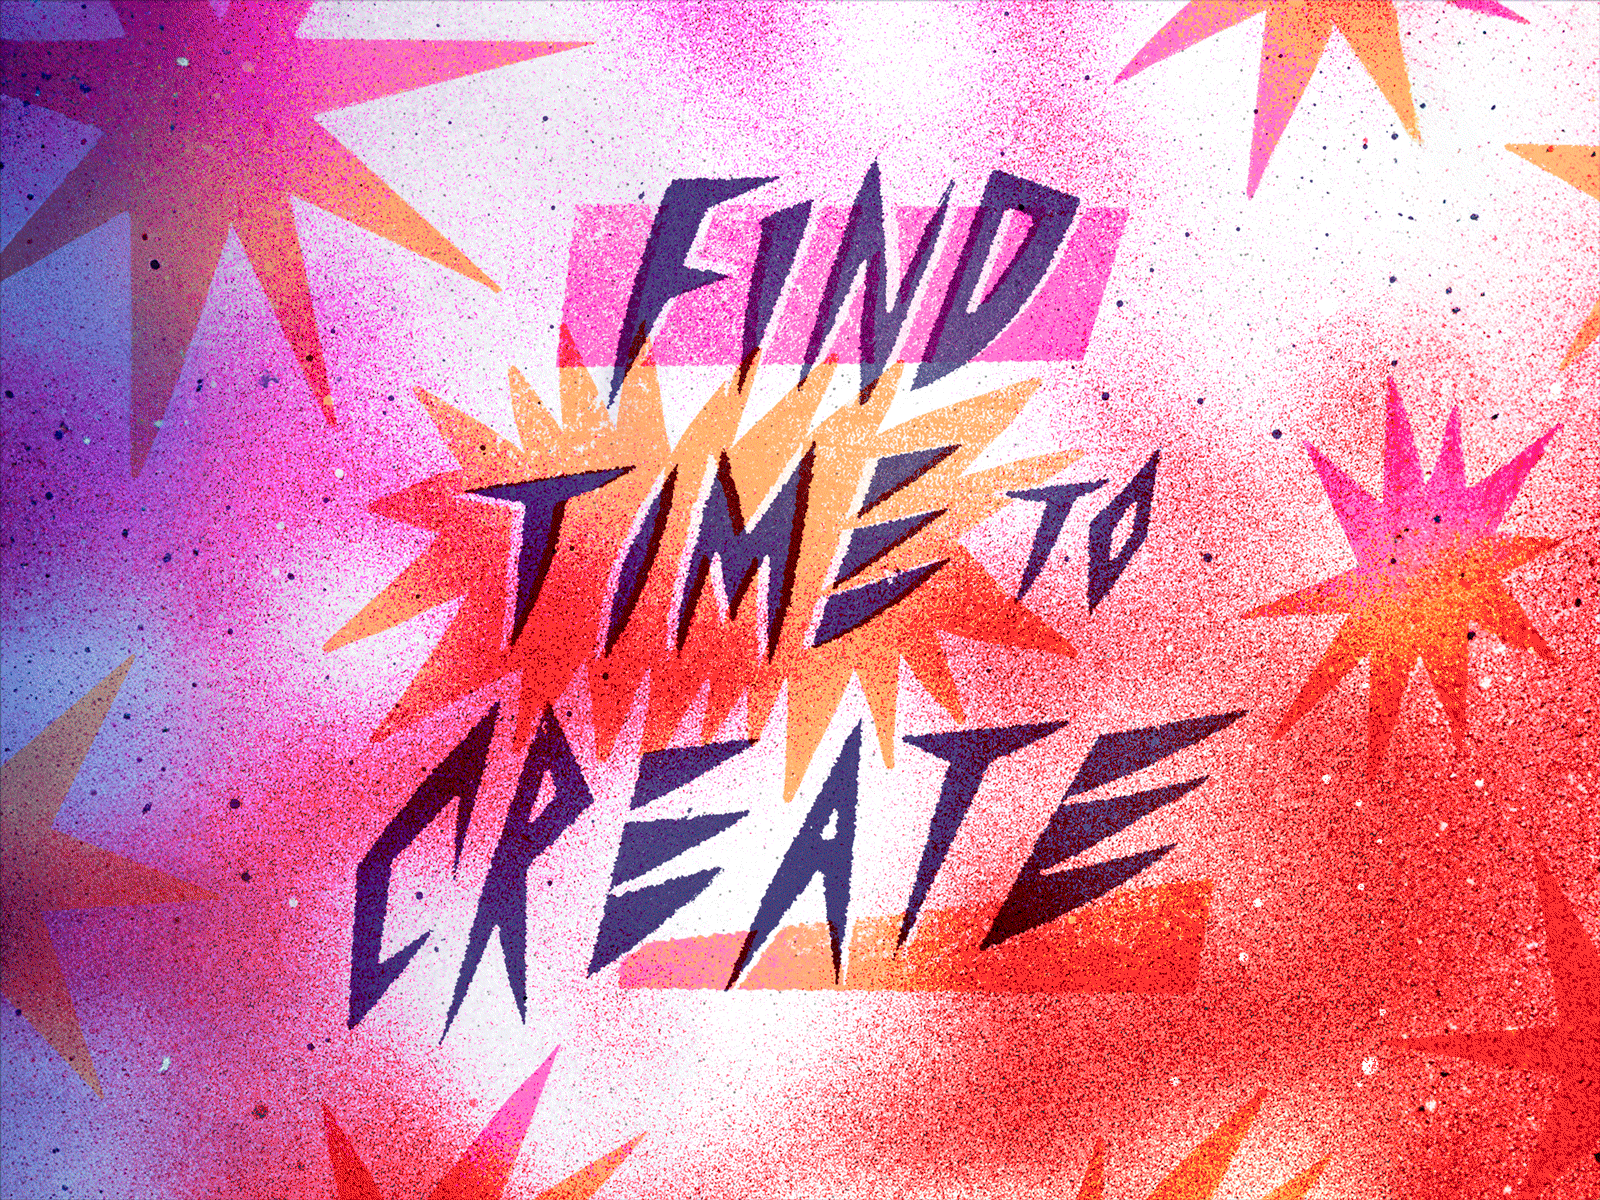 Find Time to Create creativity font handmade font handtype lettering phrase quote type type design